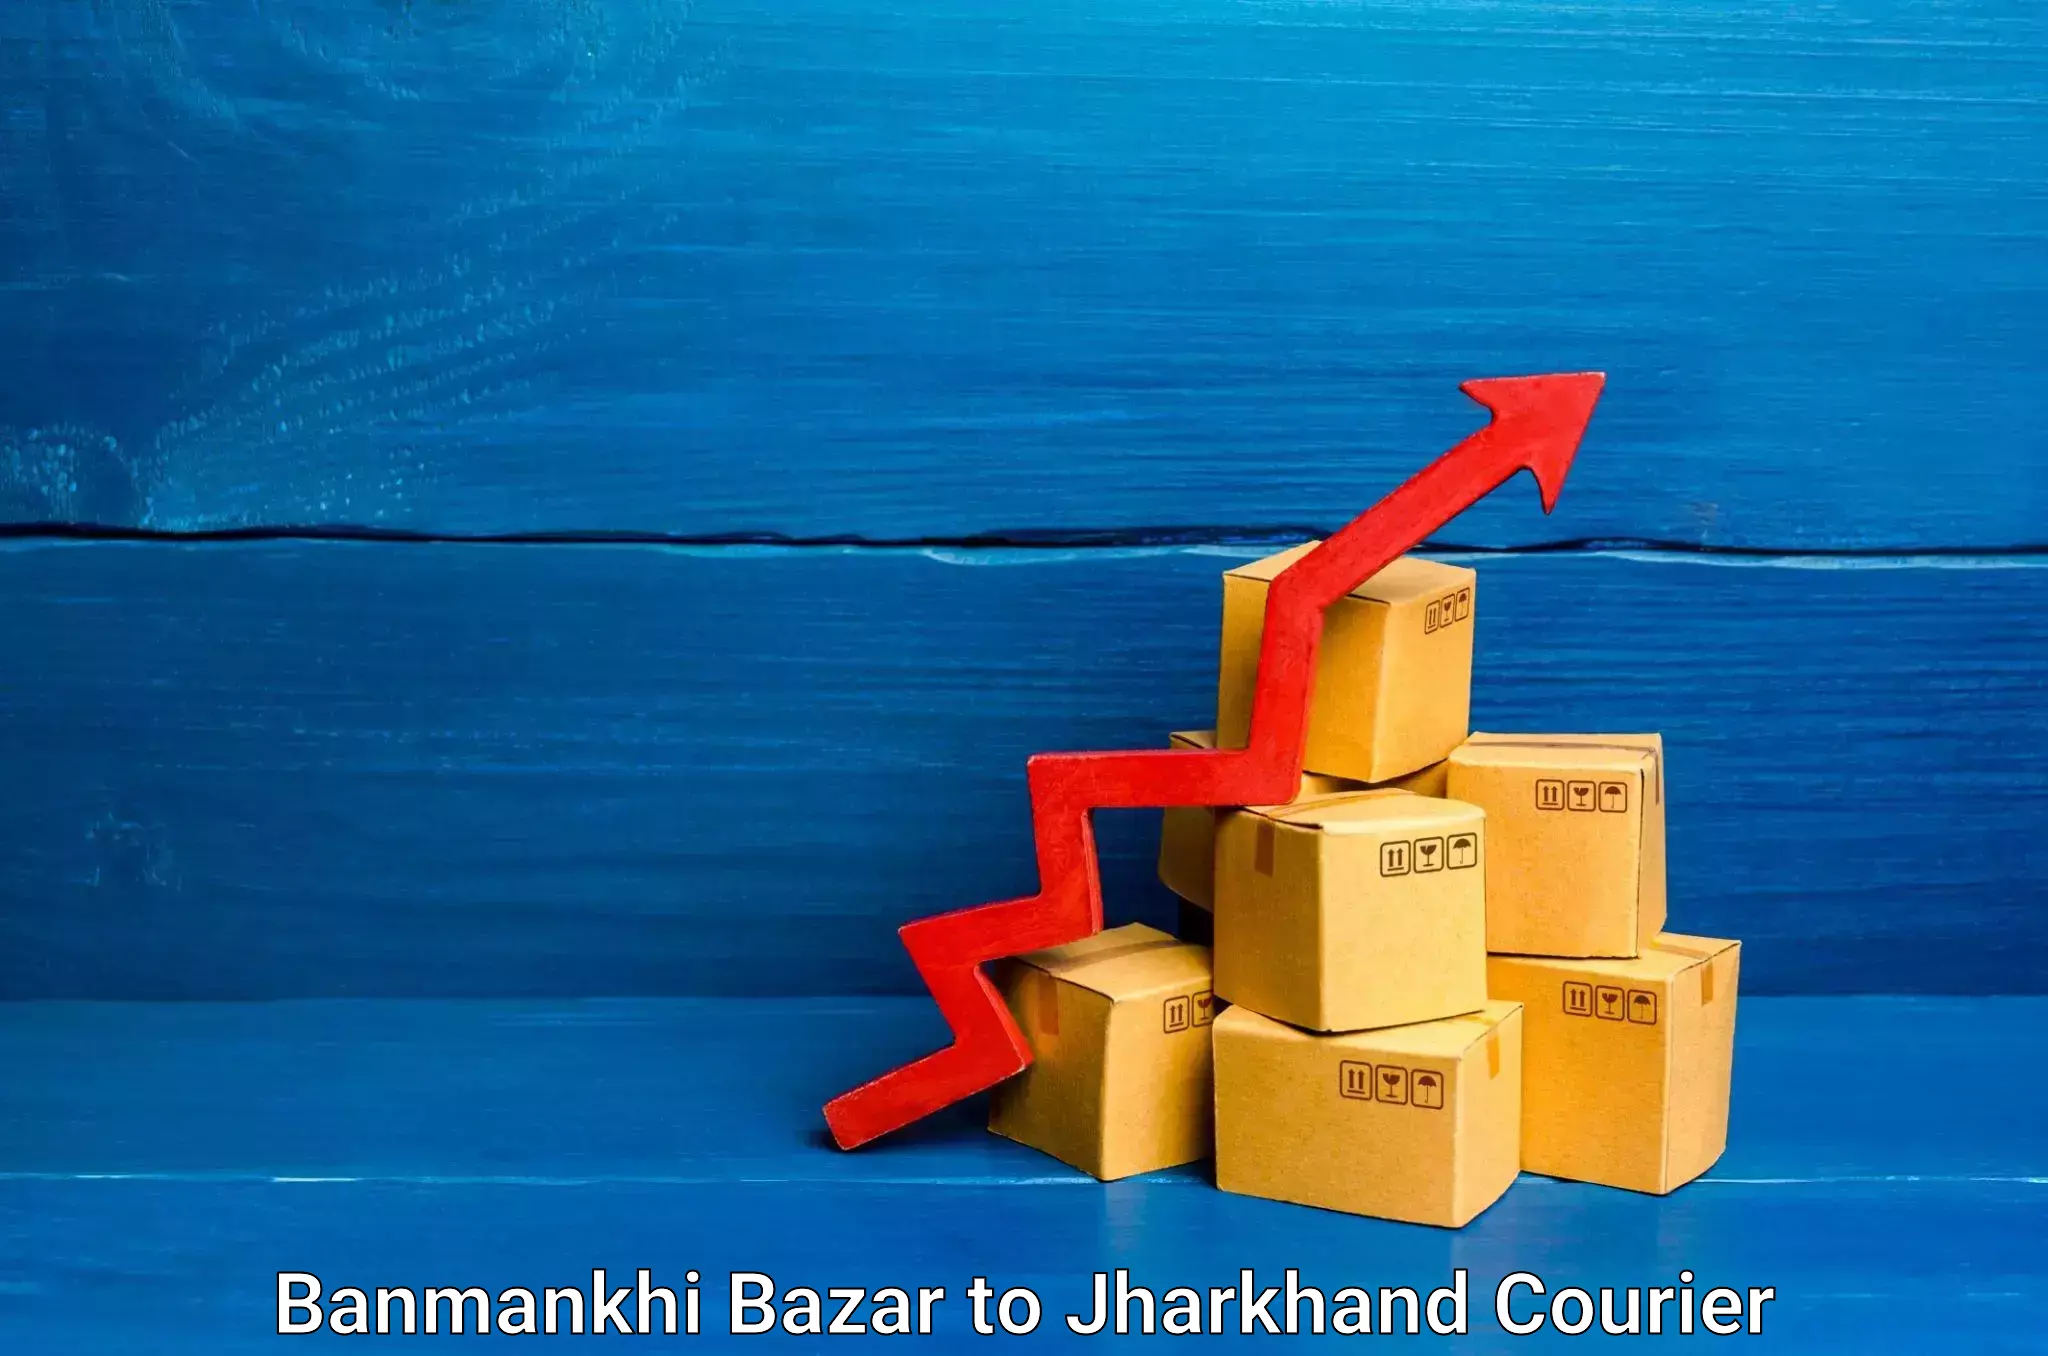 Furniture moving experts Banmankhi Bazar to Jharkhand